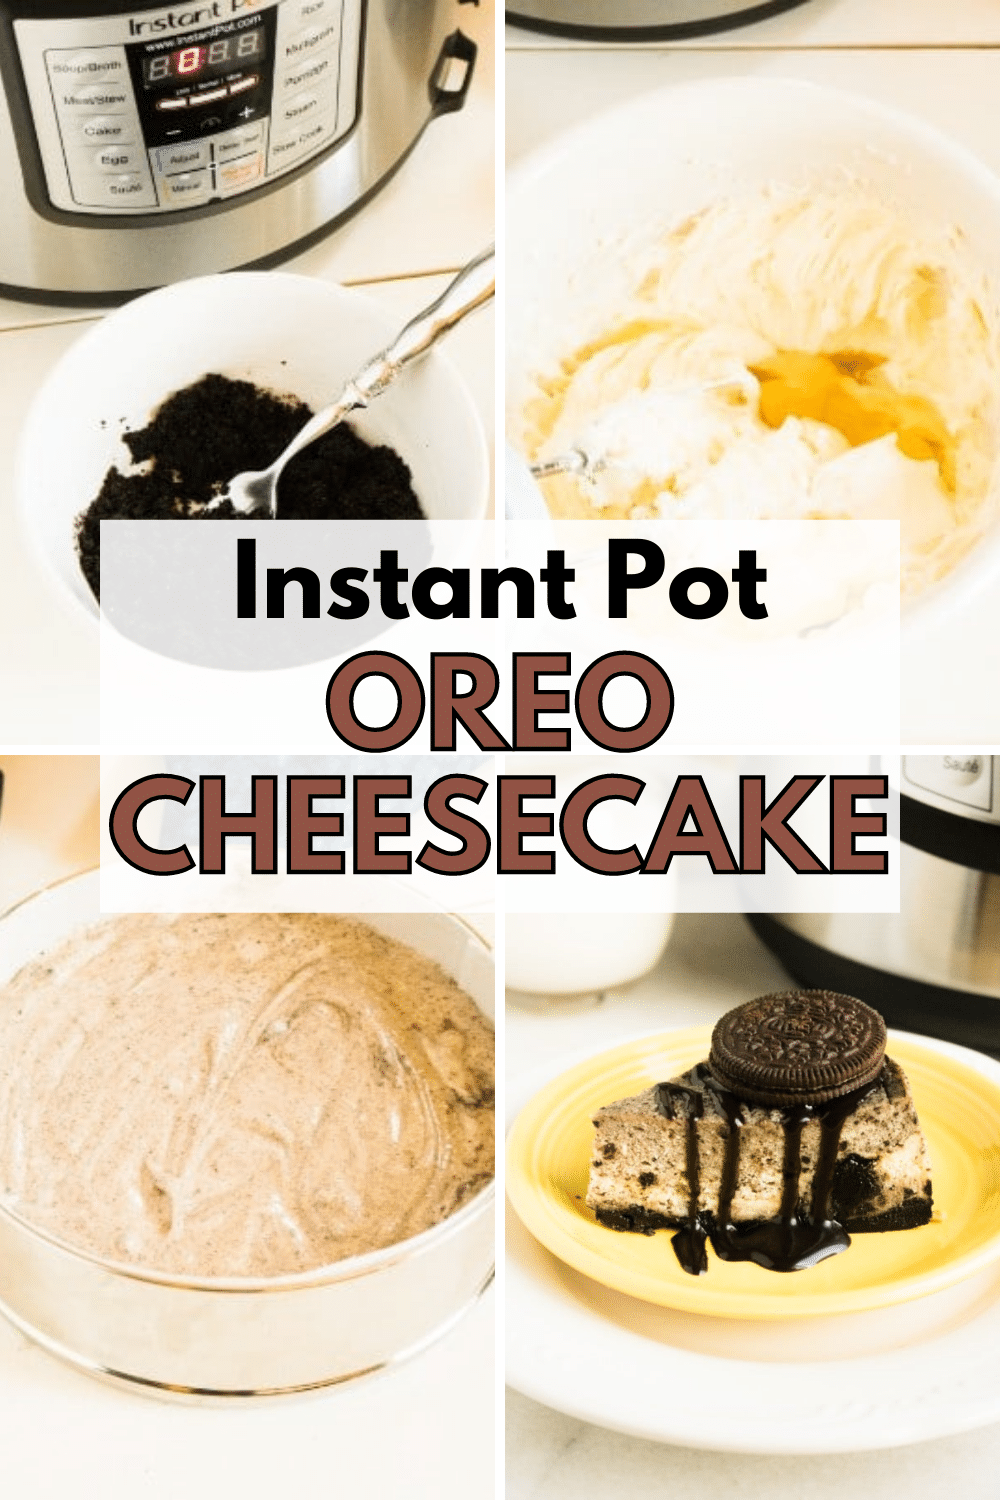 Many people love to have a delicious dessert to serve as the finale to their meals. This Instant Pot Oreo Cheesecake provides the perfect end to a wonderful dinner. #instantpot #pressurecooker #cheesecake #dessert via @wondermomwannab